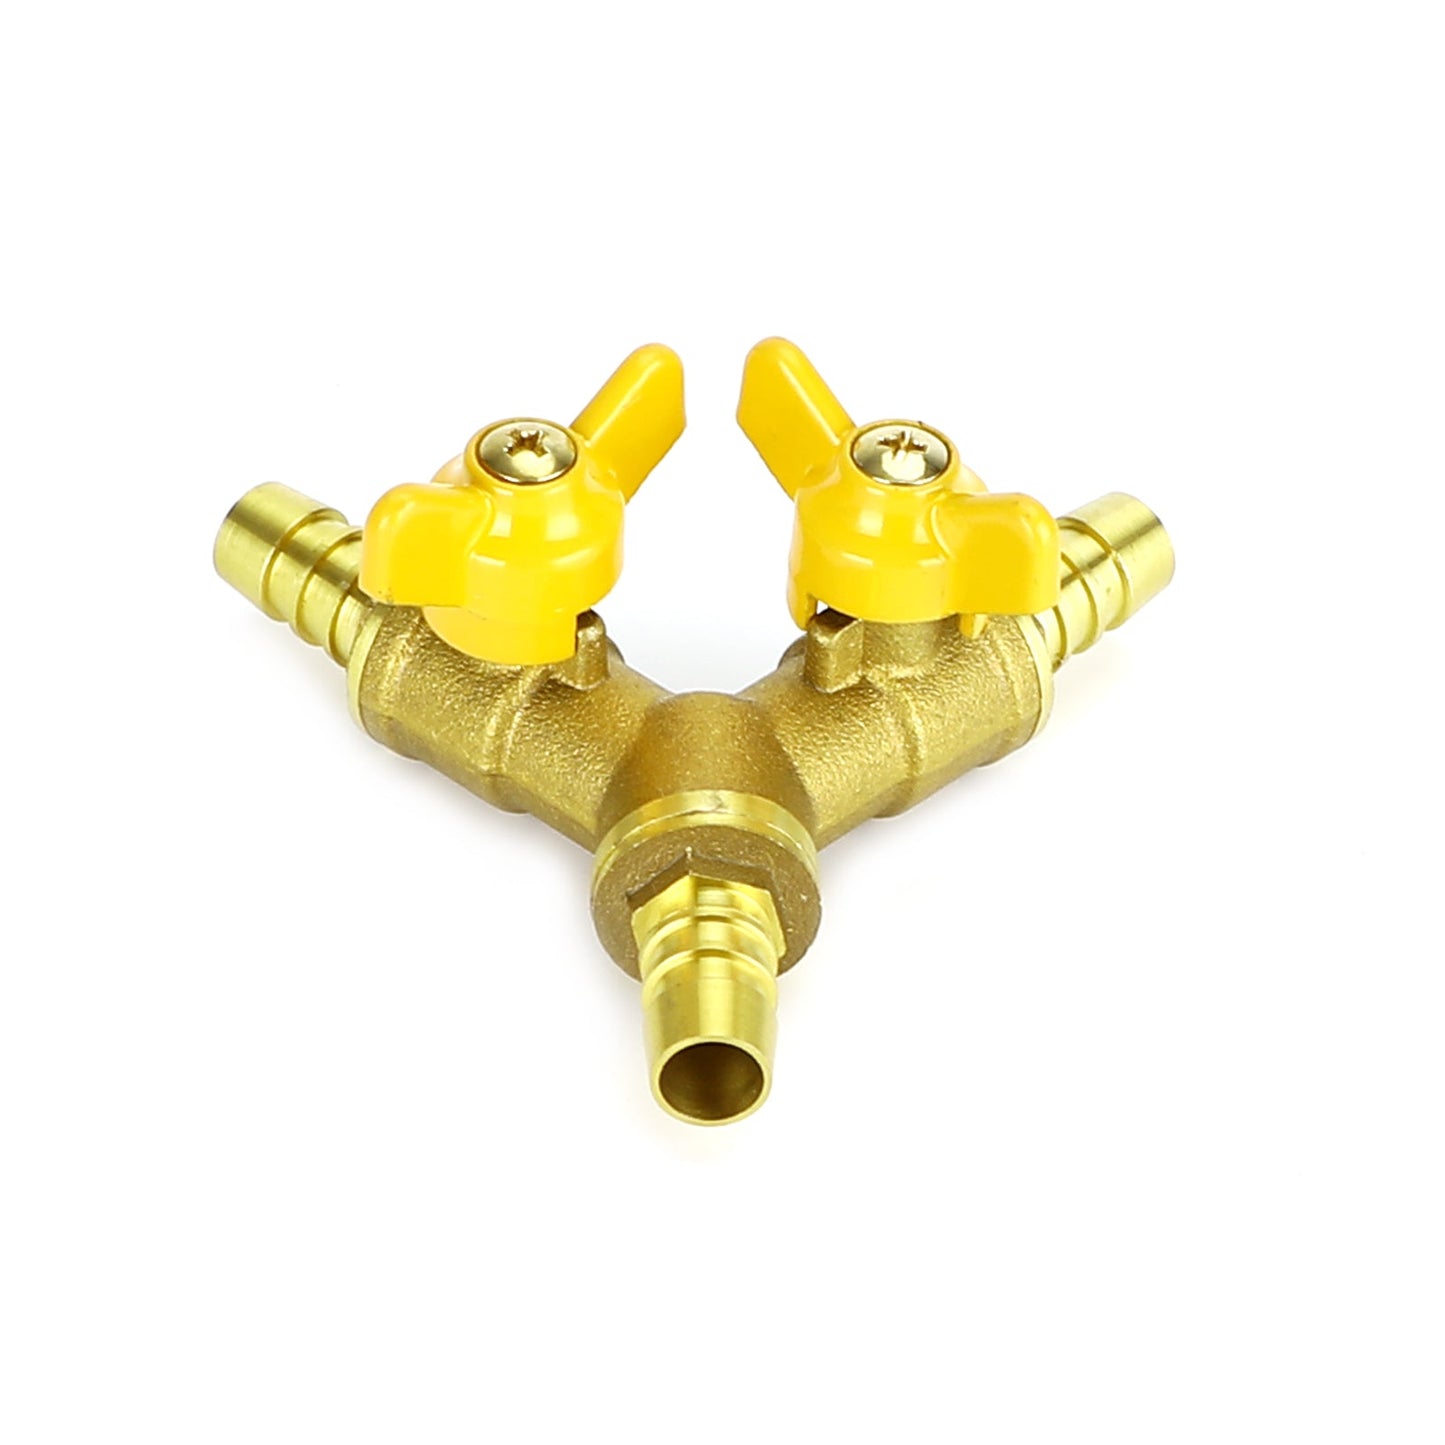 3/8" Hose Barb Ball Valve Y Shaped 3 Way Connector Barb Brass Fitting OD 11mm